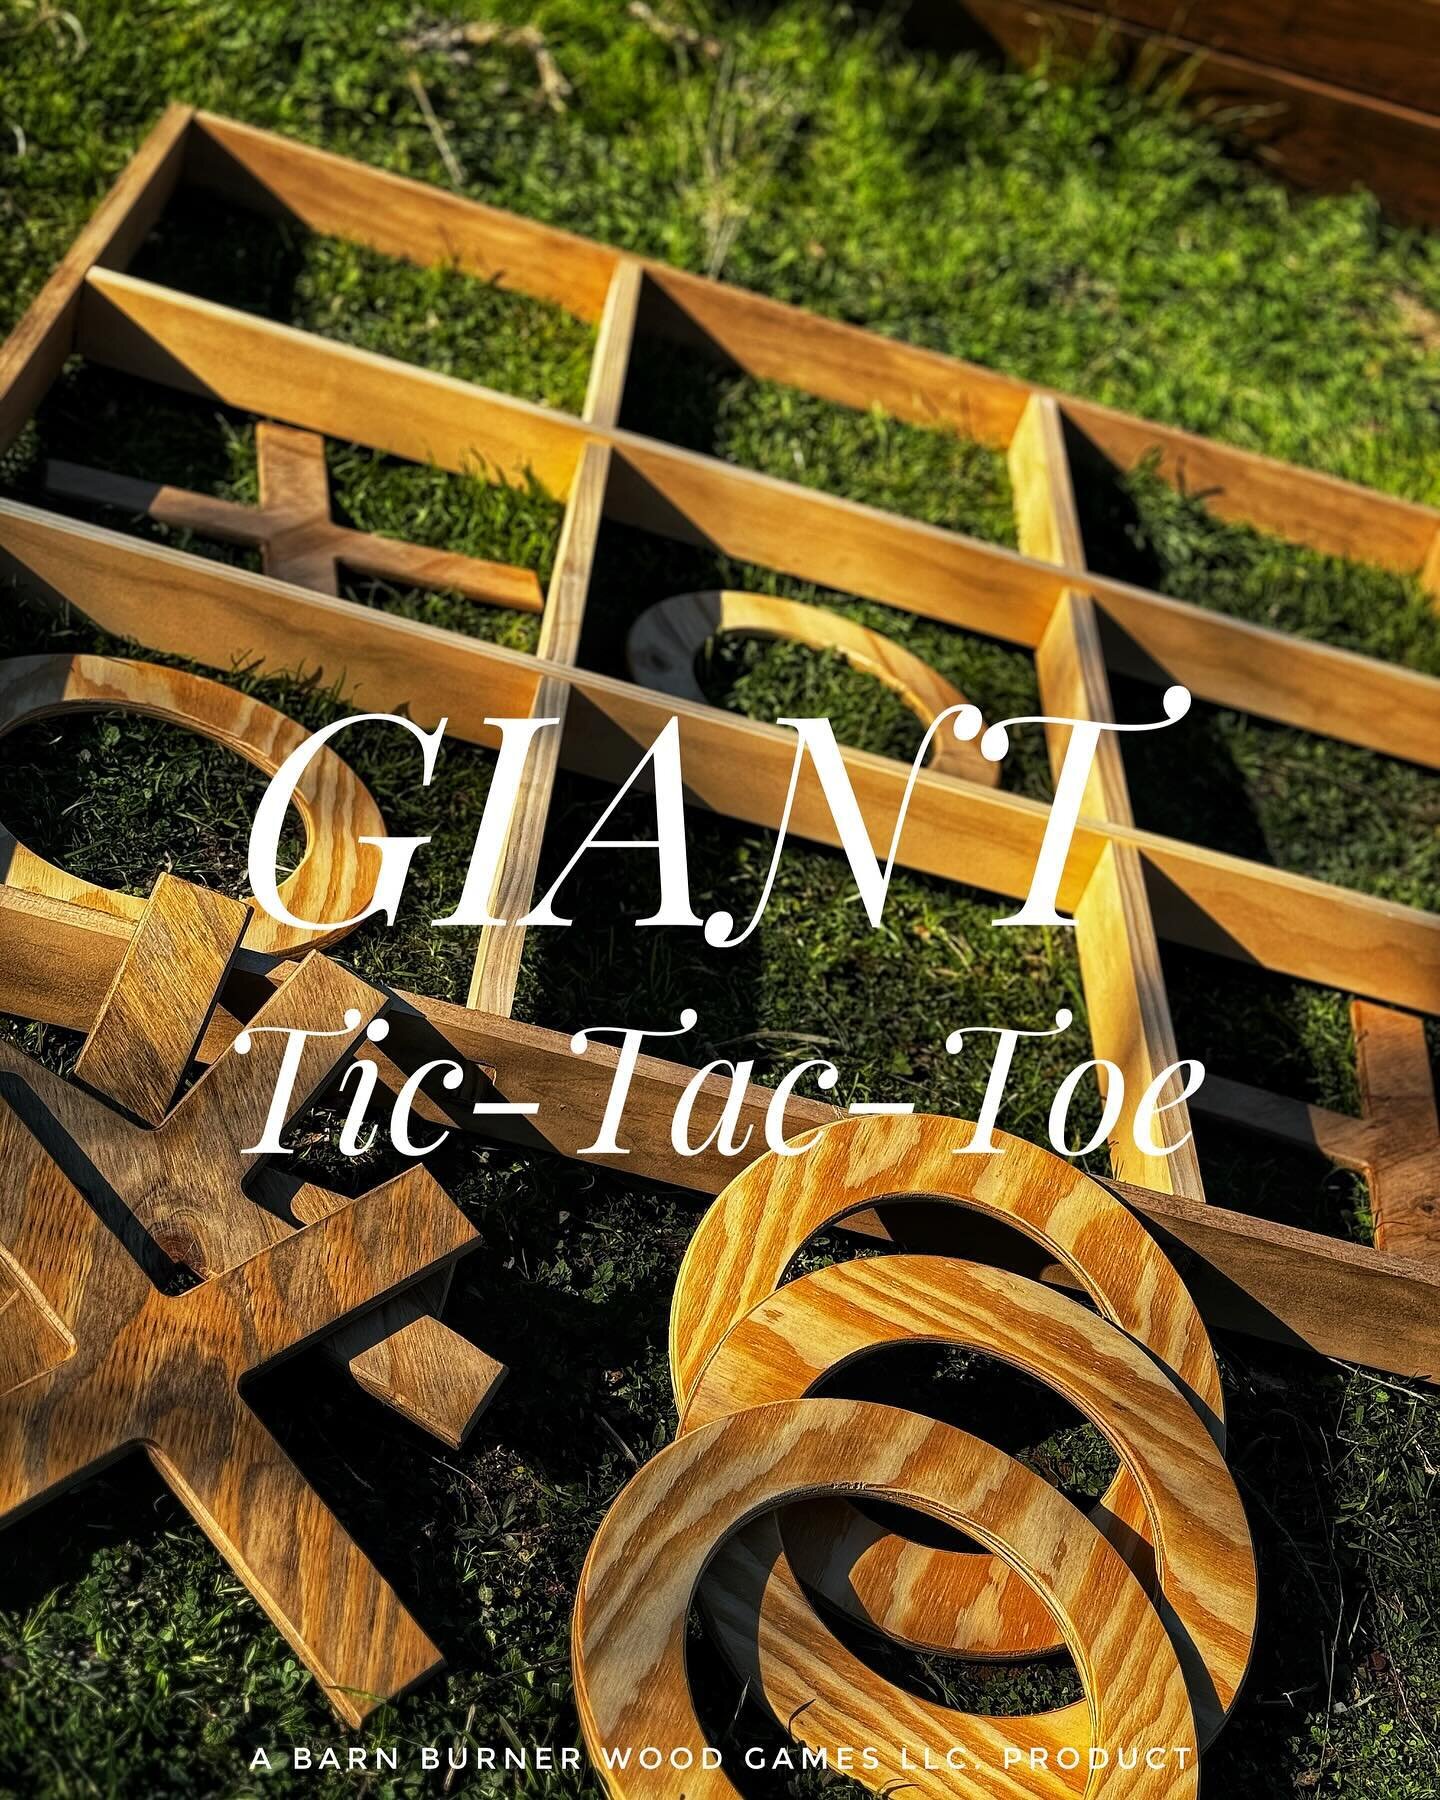 🔥Game Time🔥

Name: Giant Tic-Tac-Toe

Type: Interactive, competition

Play Style: 1 vs. 1

Category: outdoor
_______________________________________________

Tic-Tac-Toe: The universal language of fun! Whether you call it Xs and Os or Noughts and C